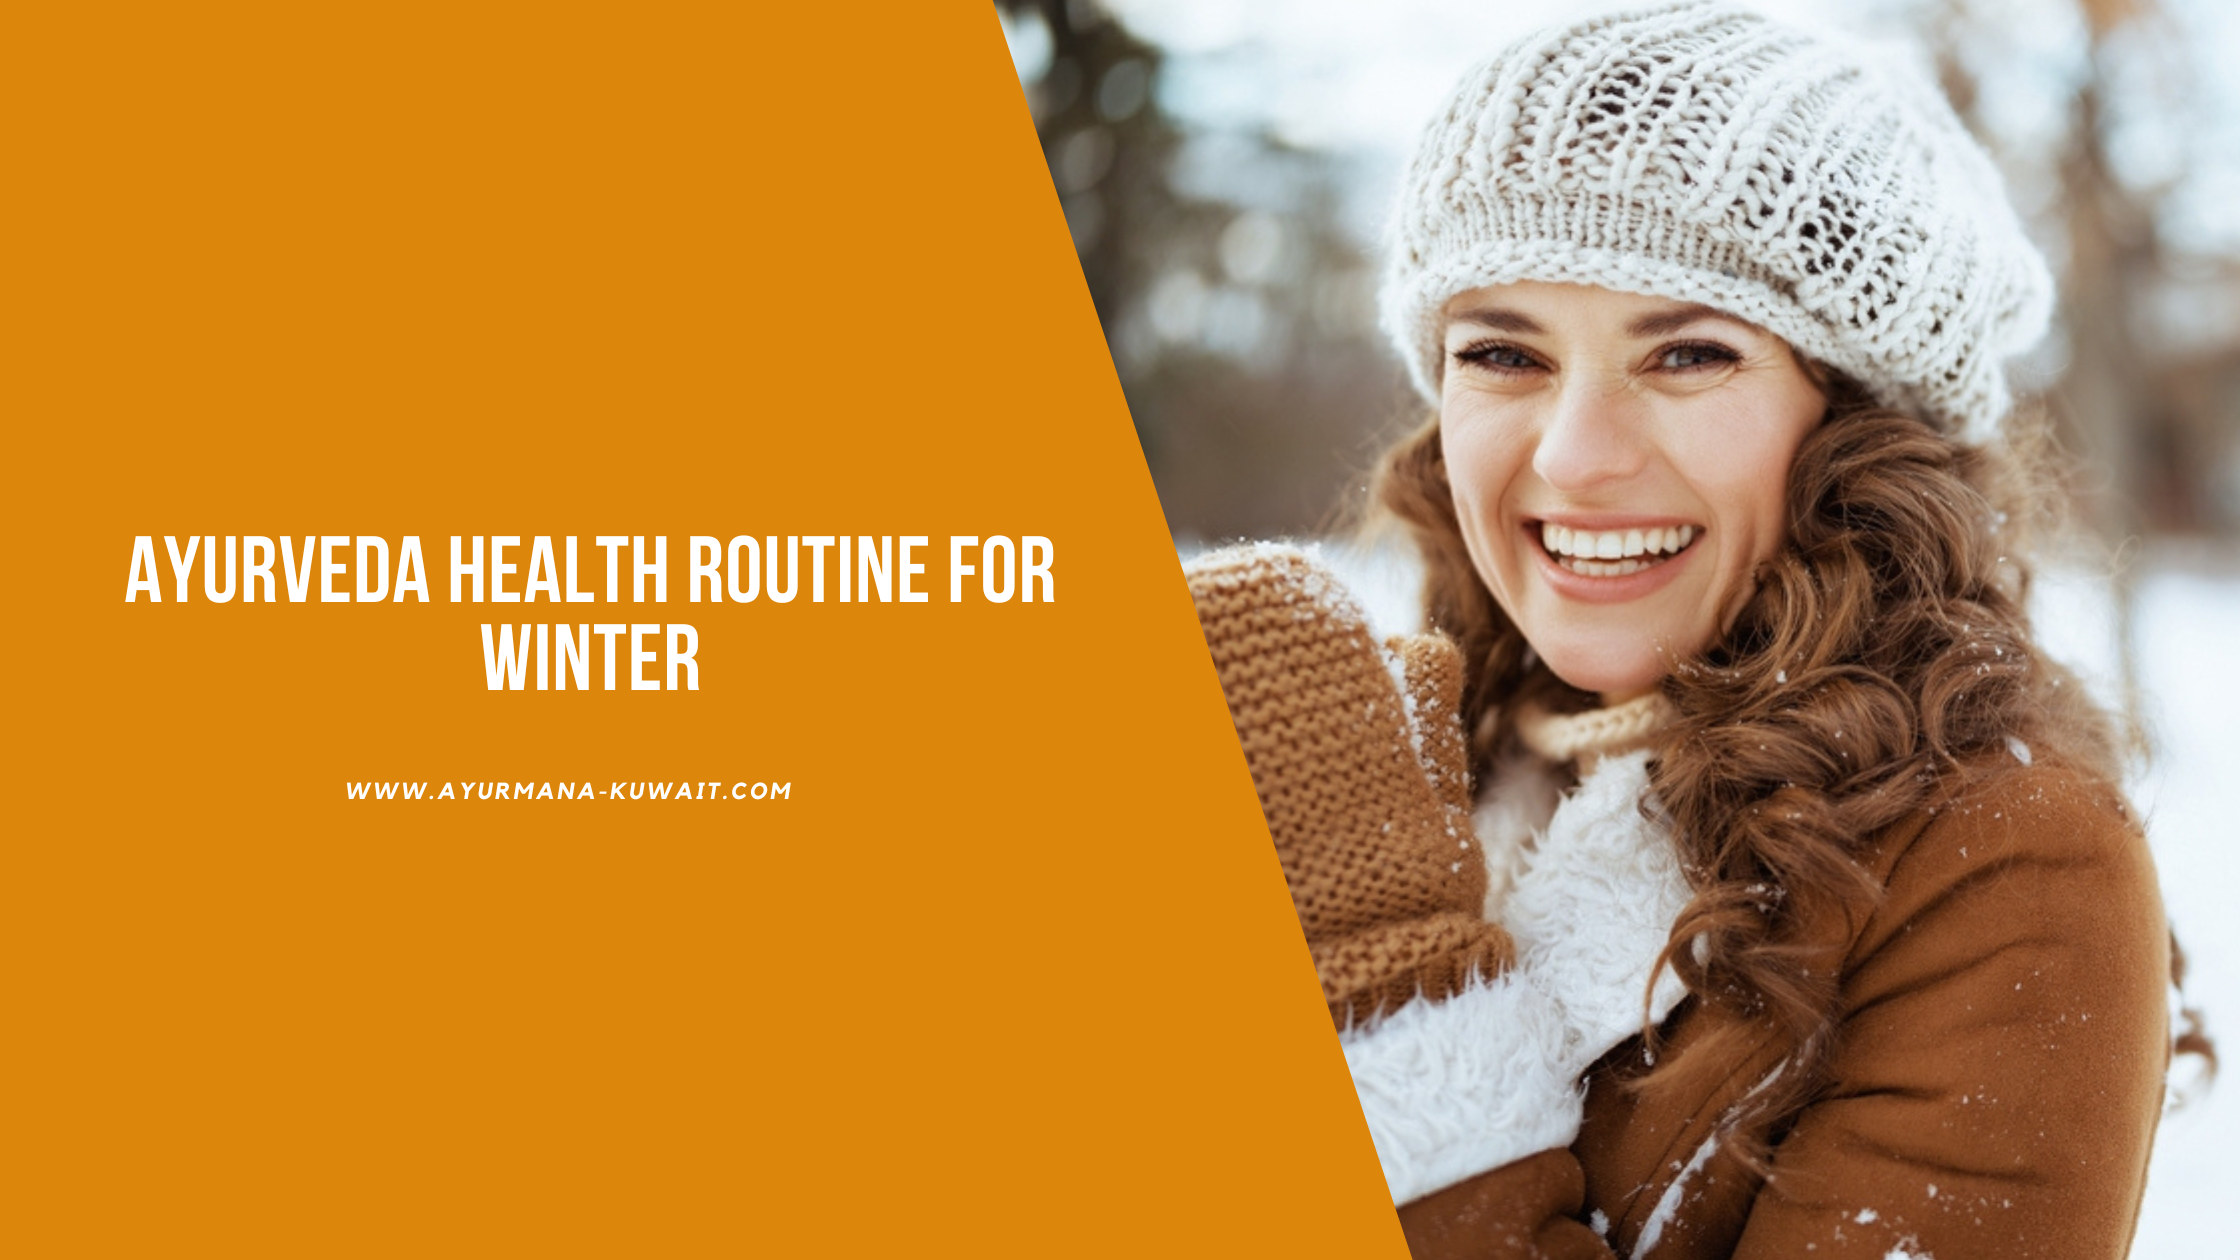 Ayurveda Health Routine for Winter